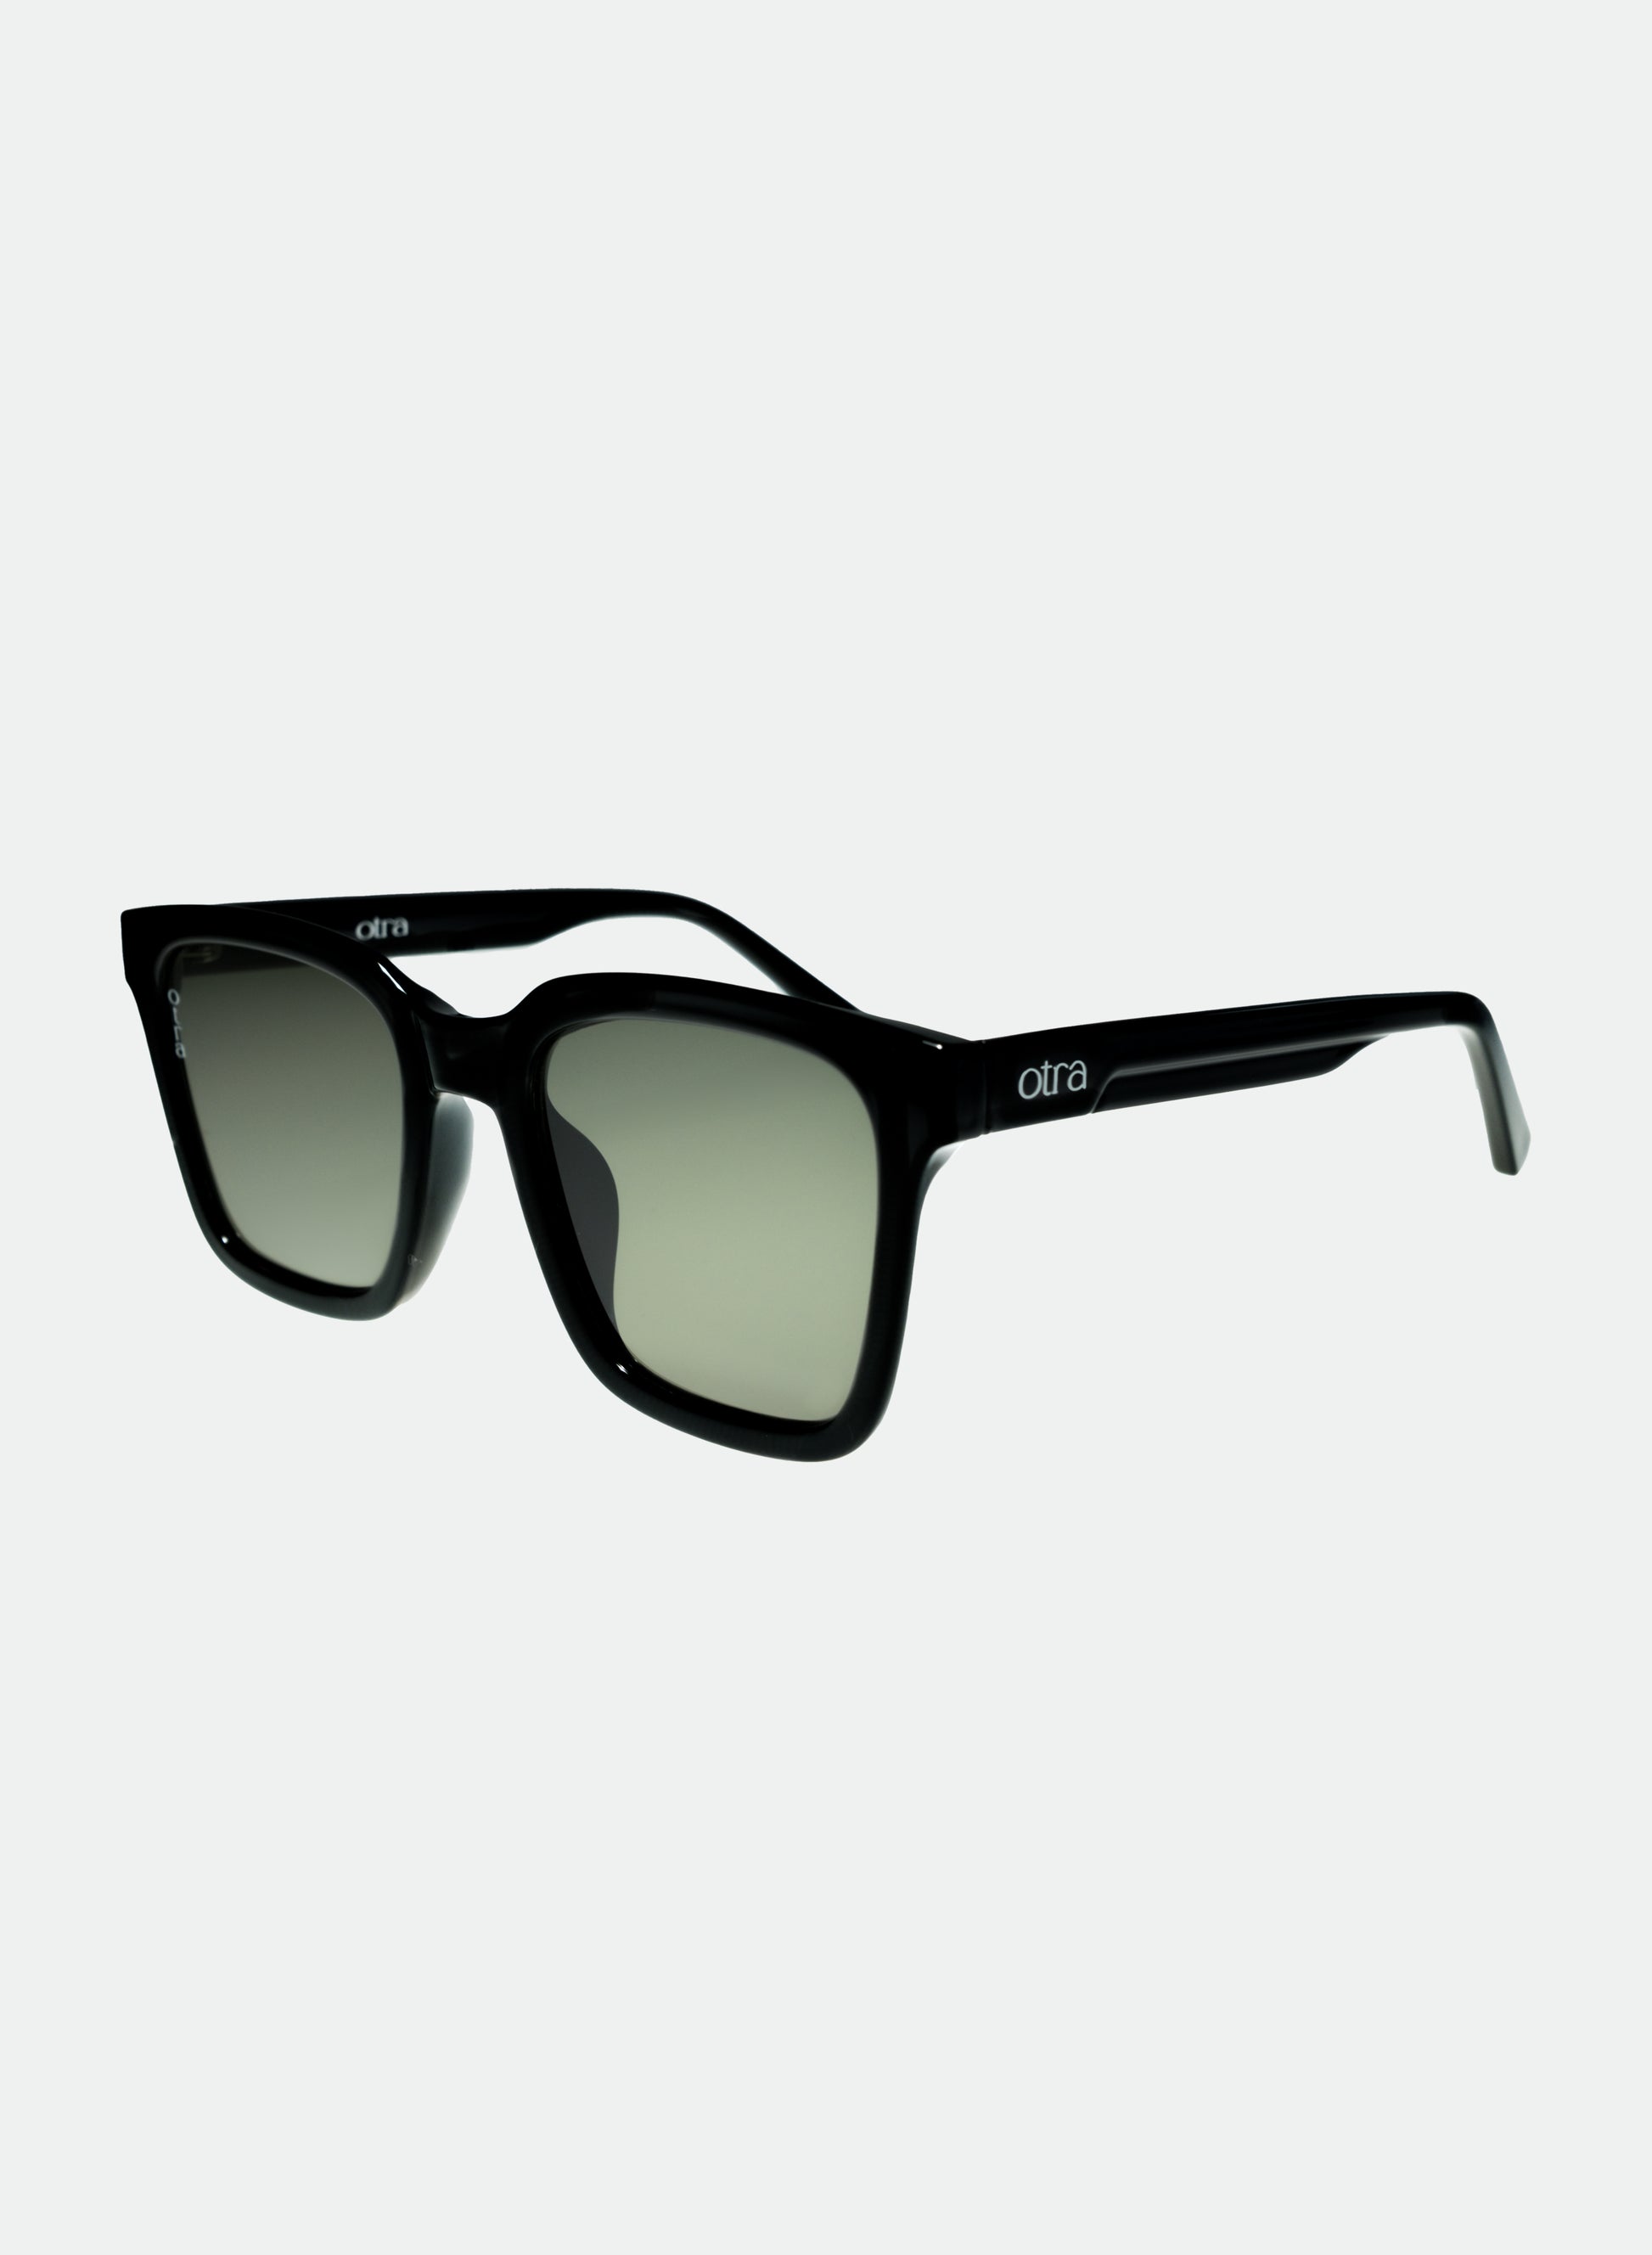 Side view Fyn oversized square sunglasses in black